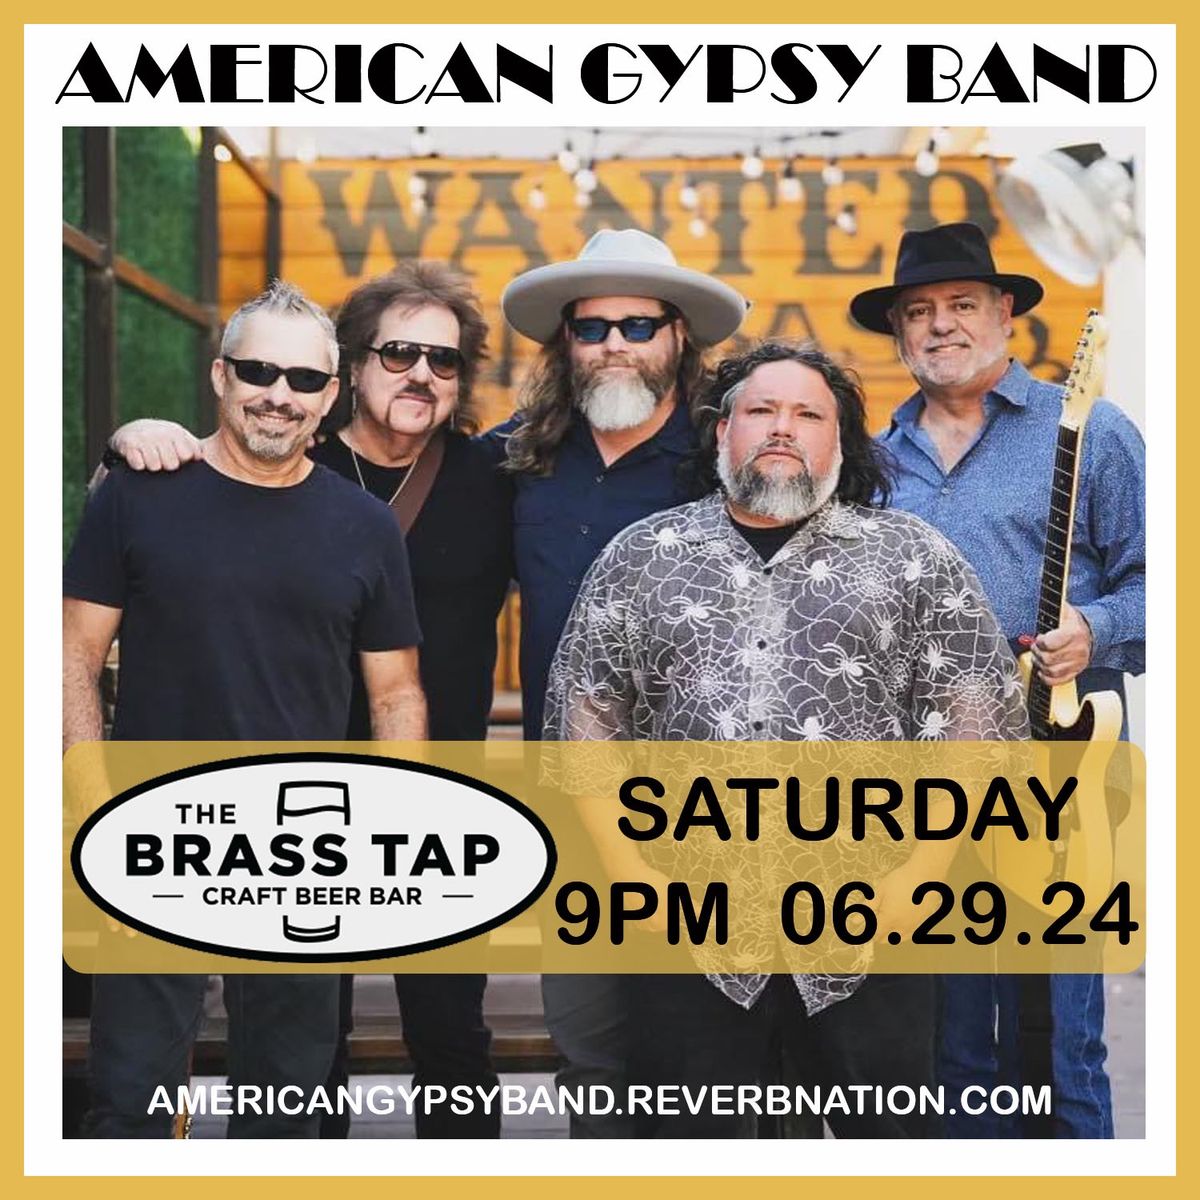 American Gypsy Band acoustic show at the Brass Tap